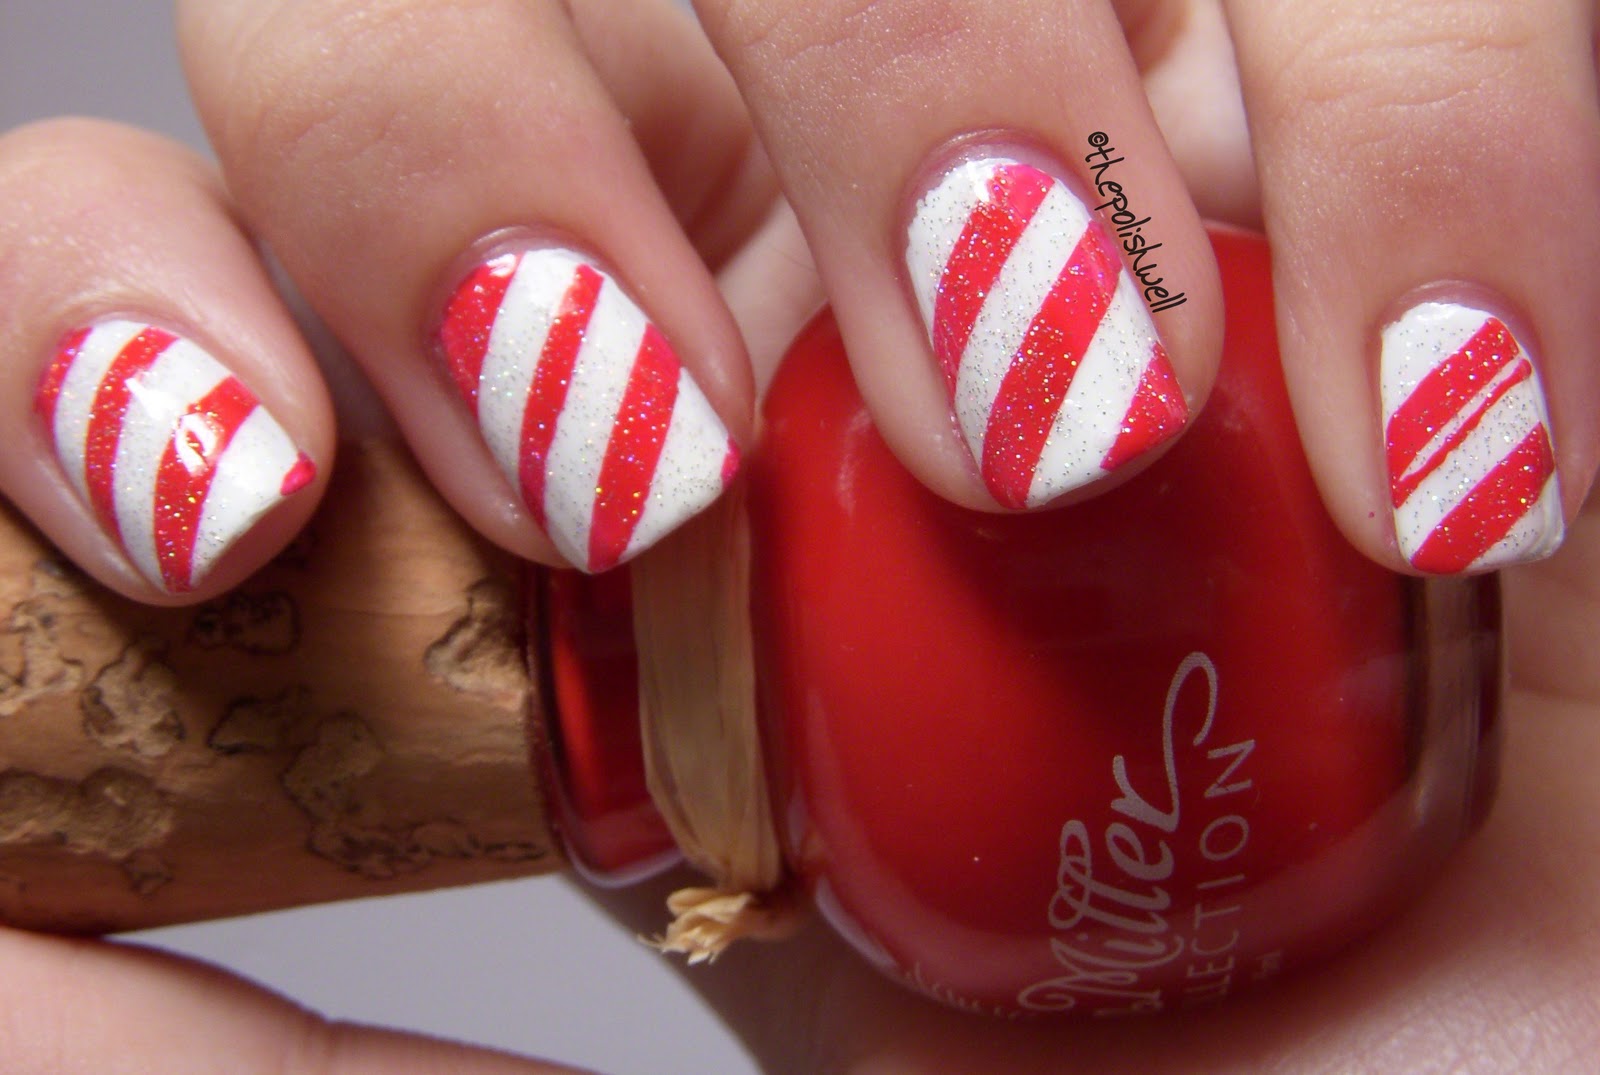 10. Candy Cane Nail Stamp Designs - wide 5